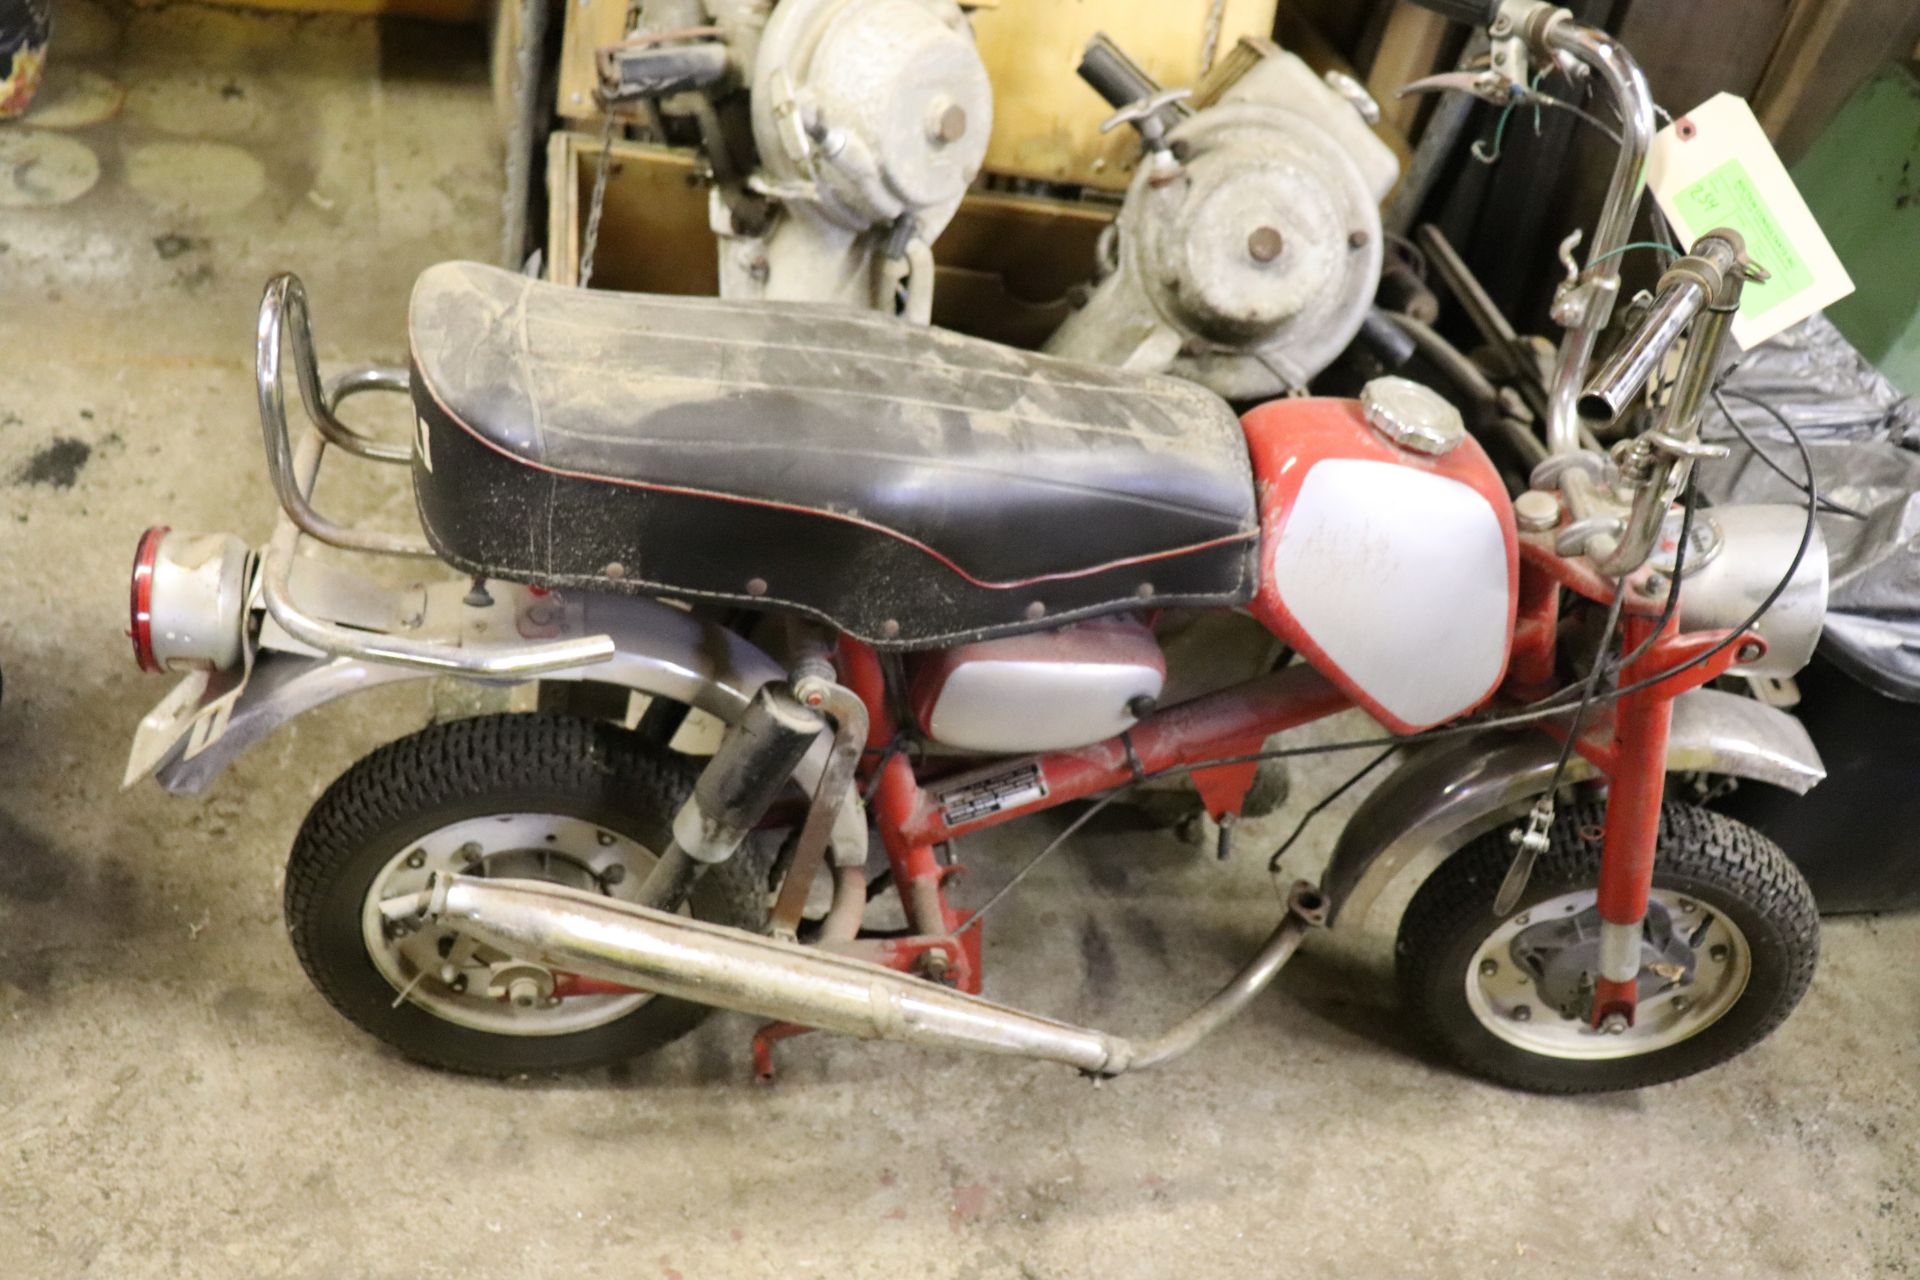 1970 Benelli Buzzer, rolling chassis, 1,262 miles, serial #537684 MINI BIKES MARKED AS PARTS BIKES, - Image 5 of 7